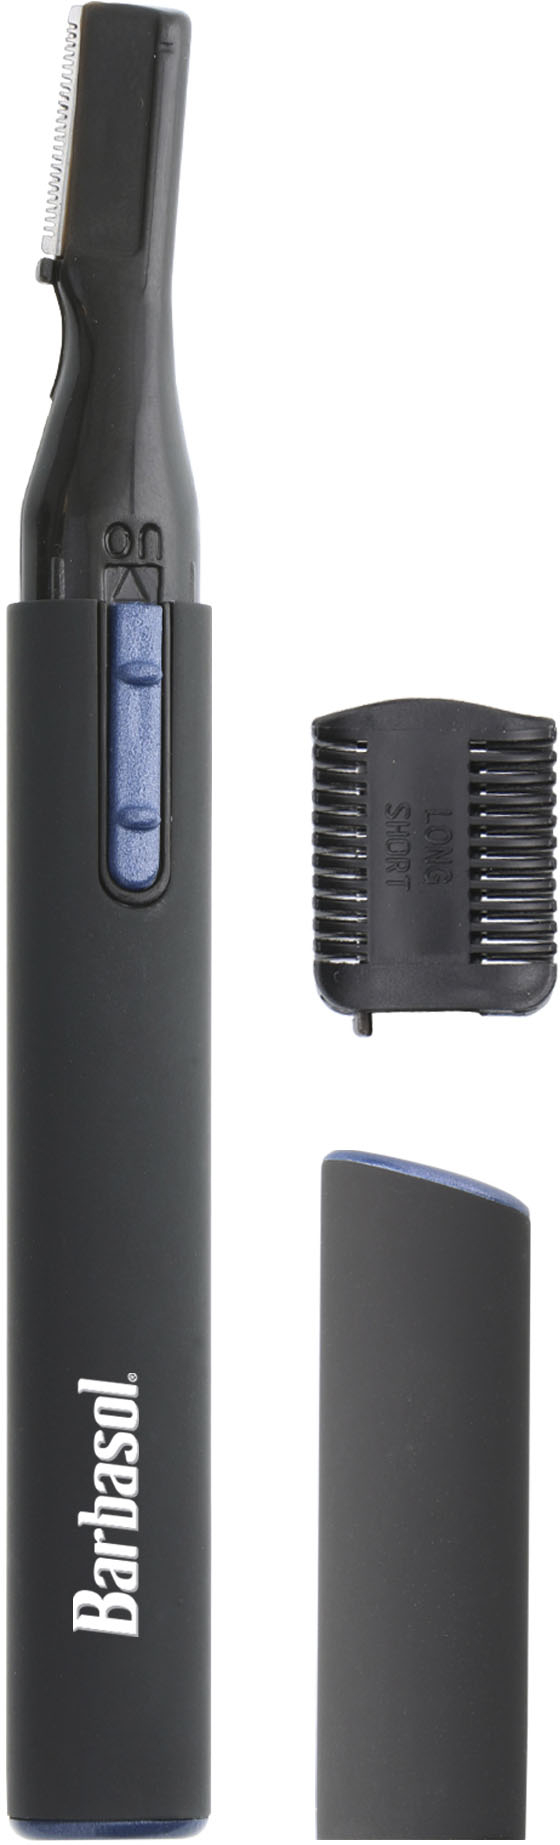 Left View: Barbasol Detail Trimmer with comb for Eyebrows - Black